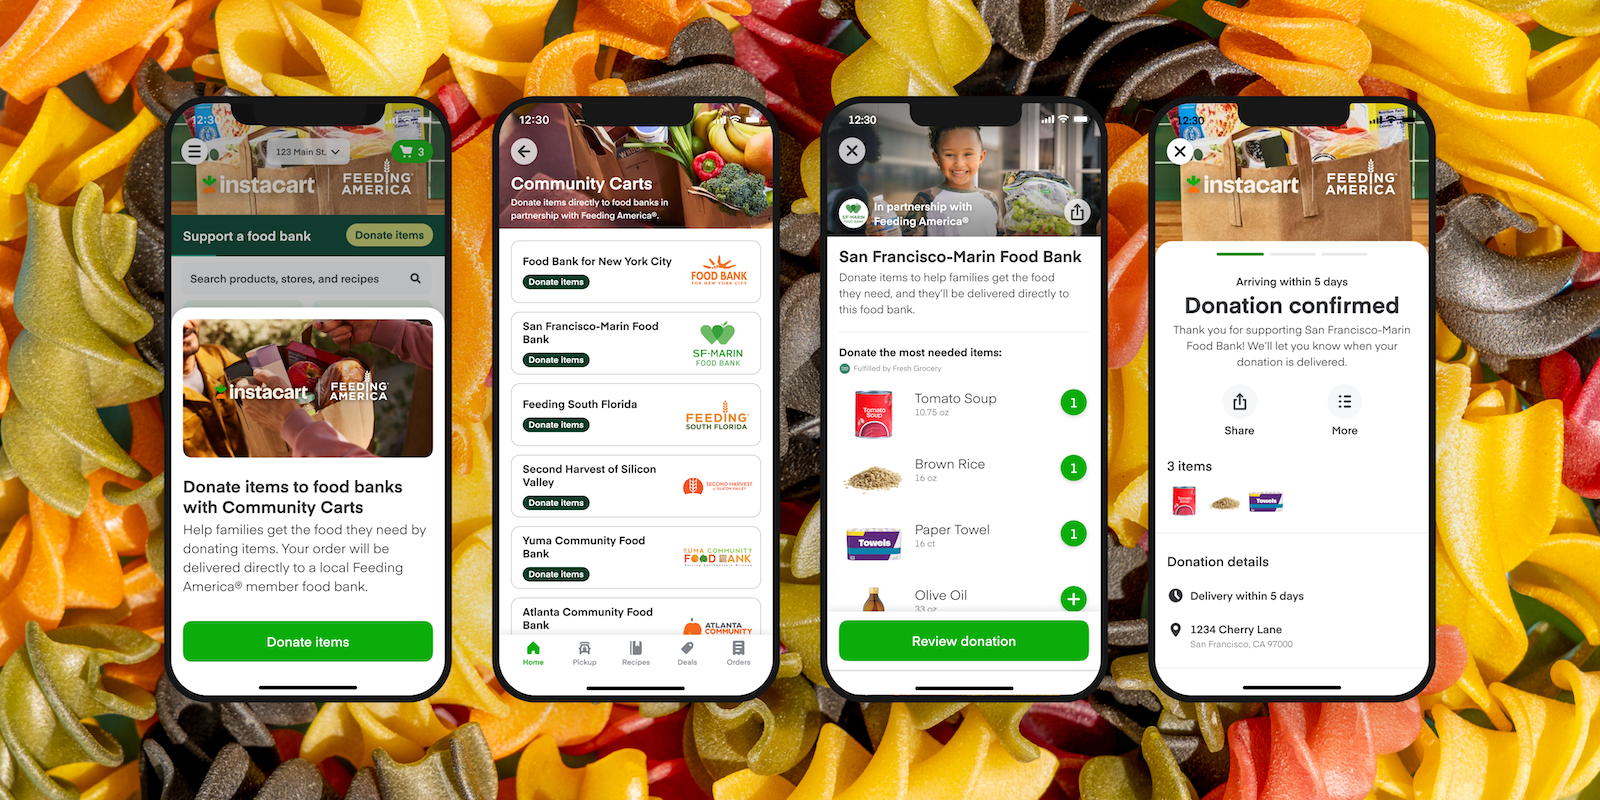 screenshots of using the Instacart app to donate to food banks